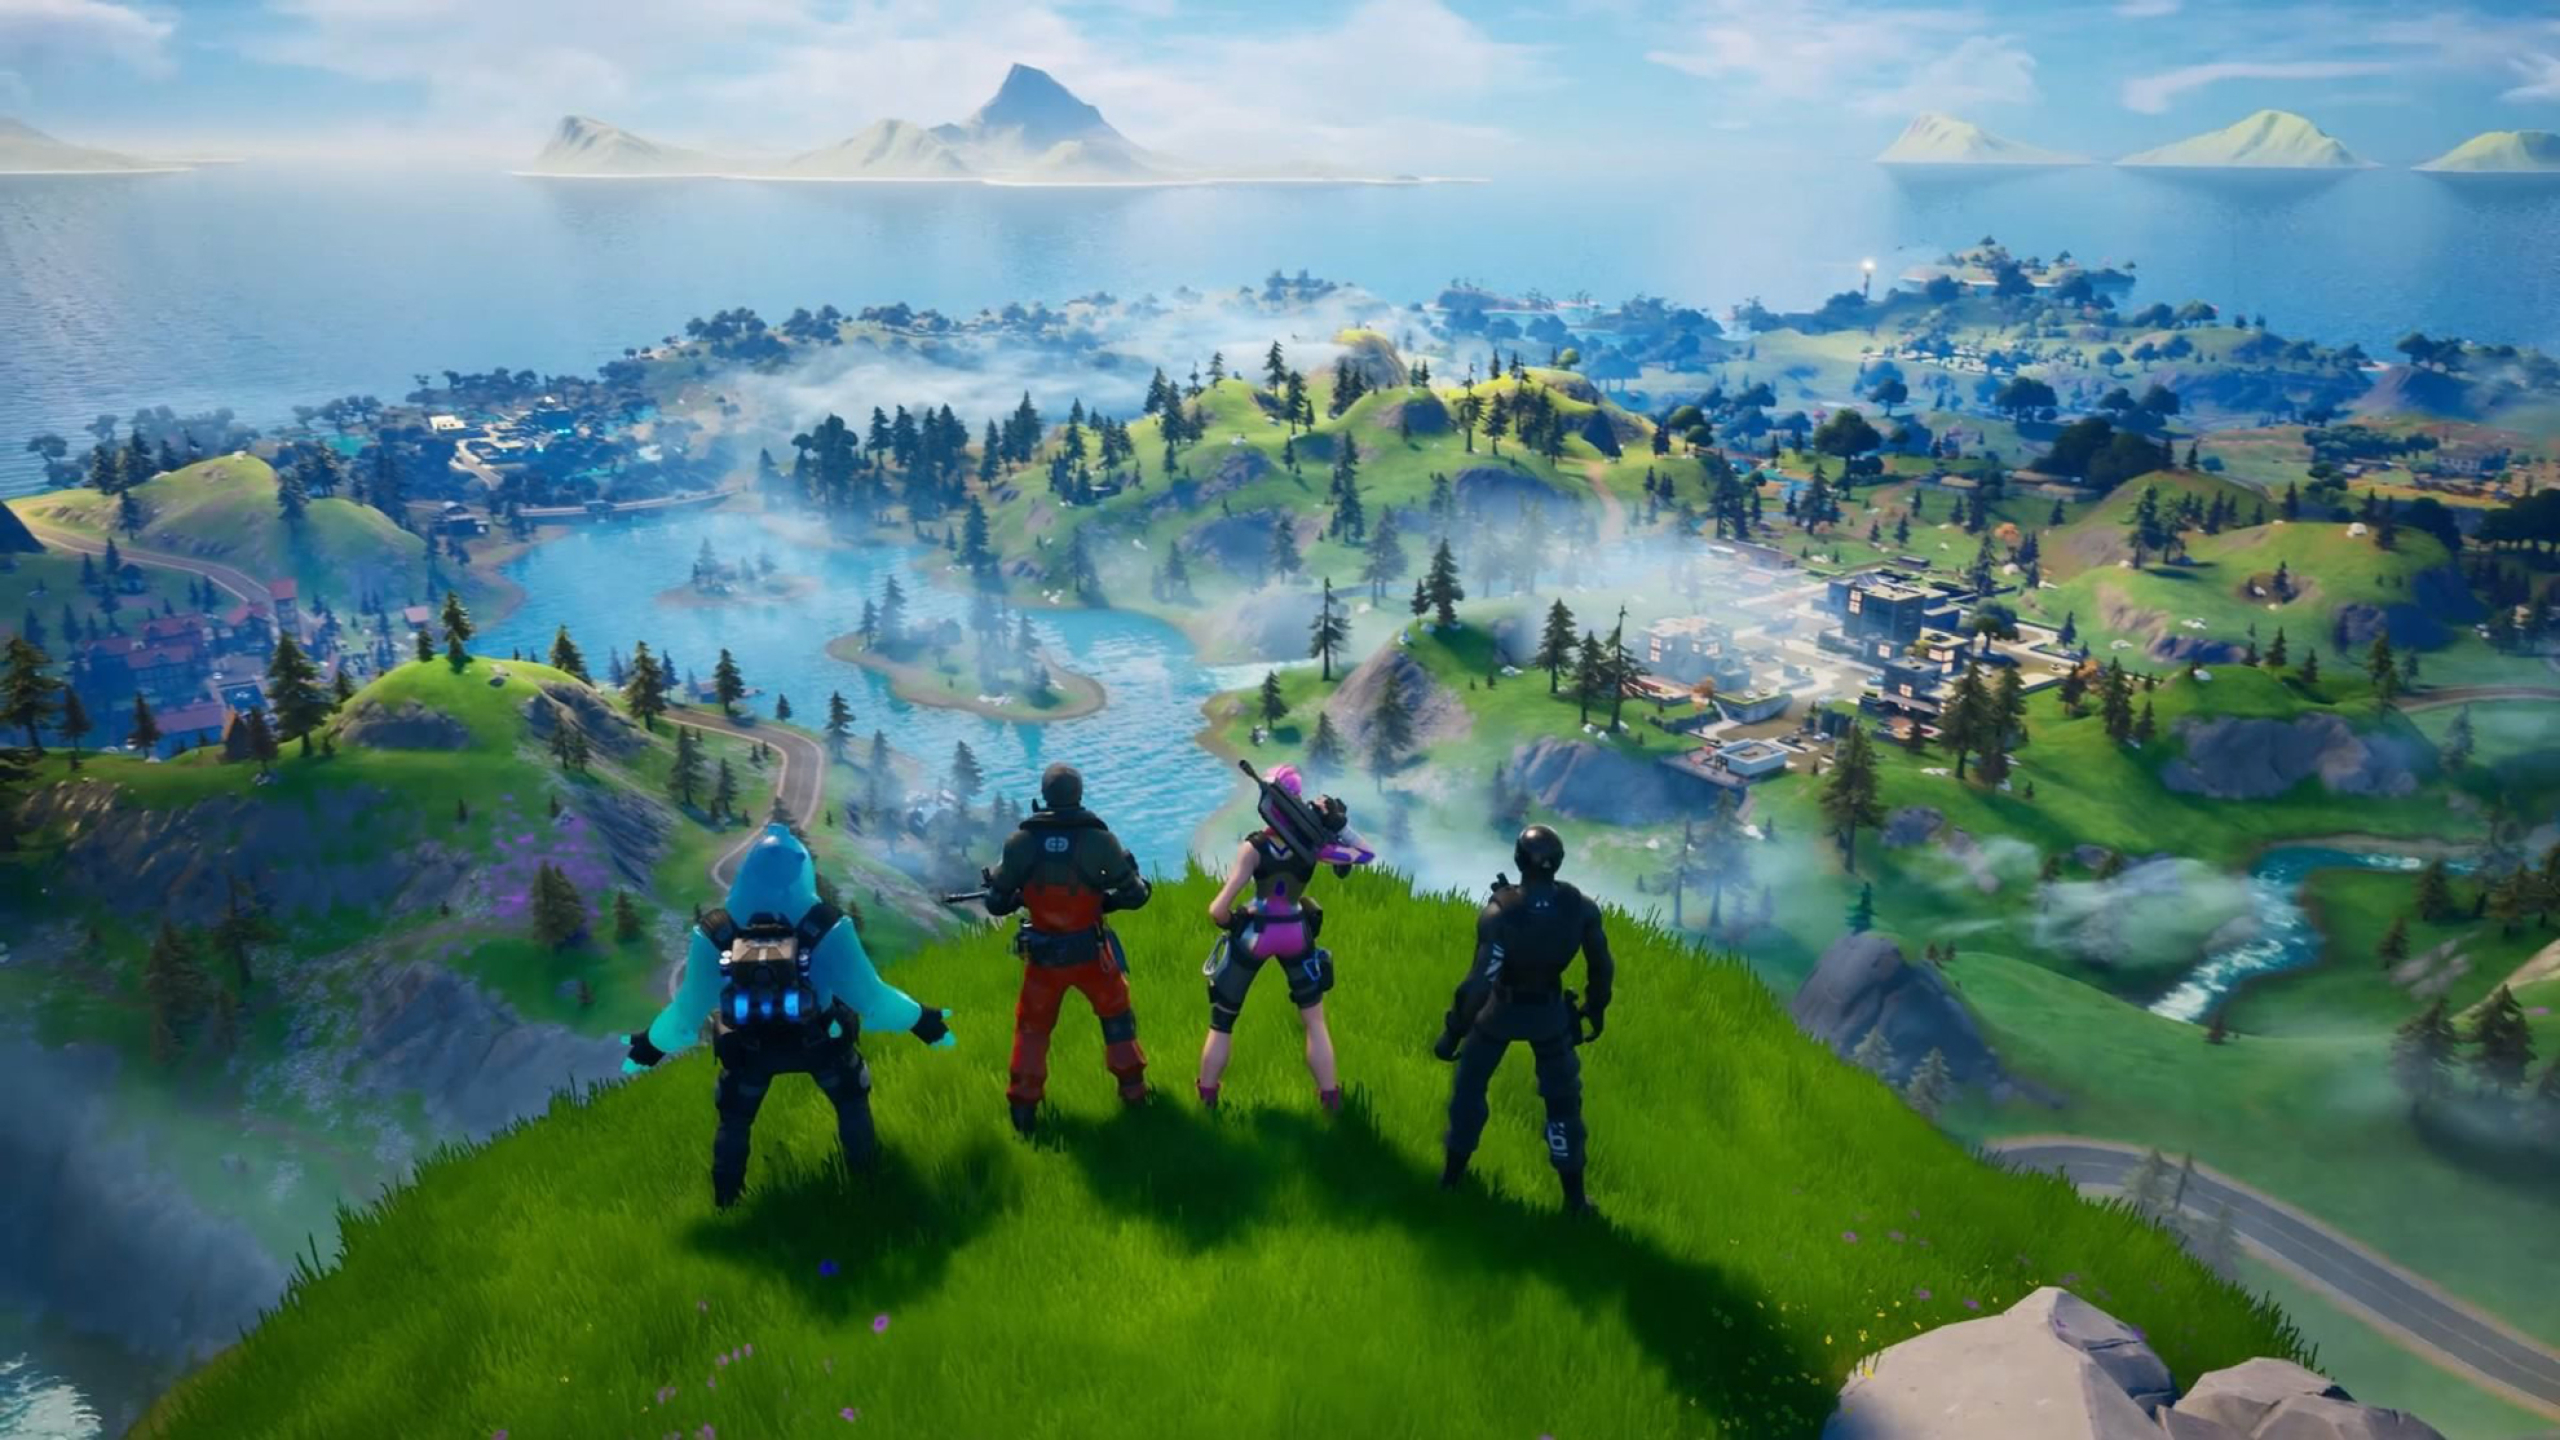 Fortnite Chapter 2 Game Wallpaper Hd Games 4k Wallpapers Images | Porn ...